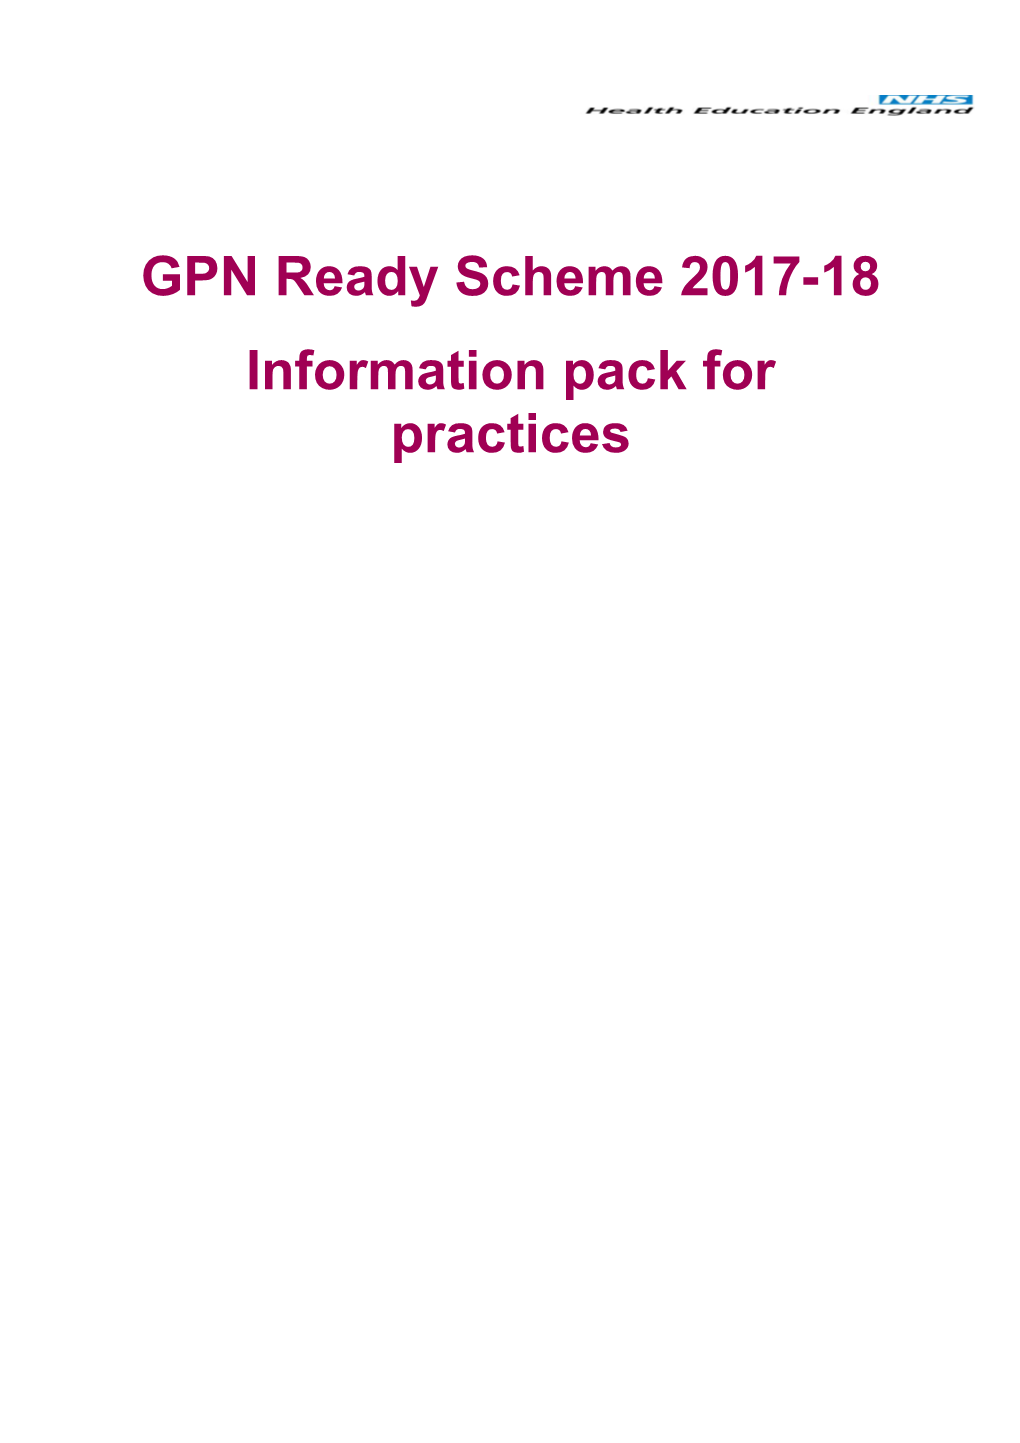 Information Pack for Practices